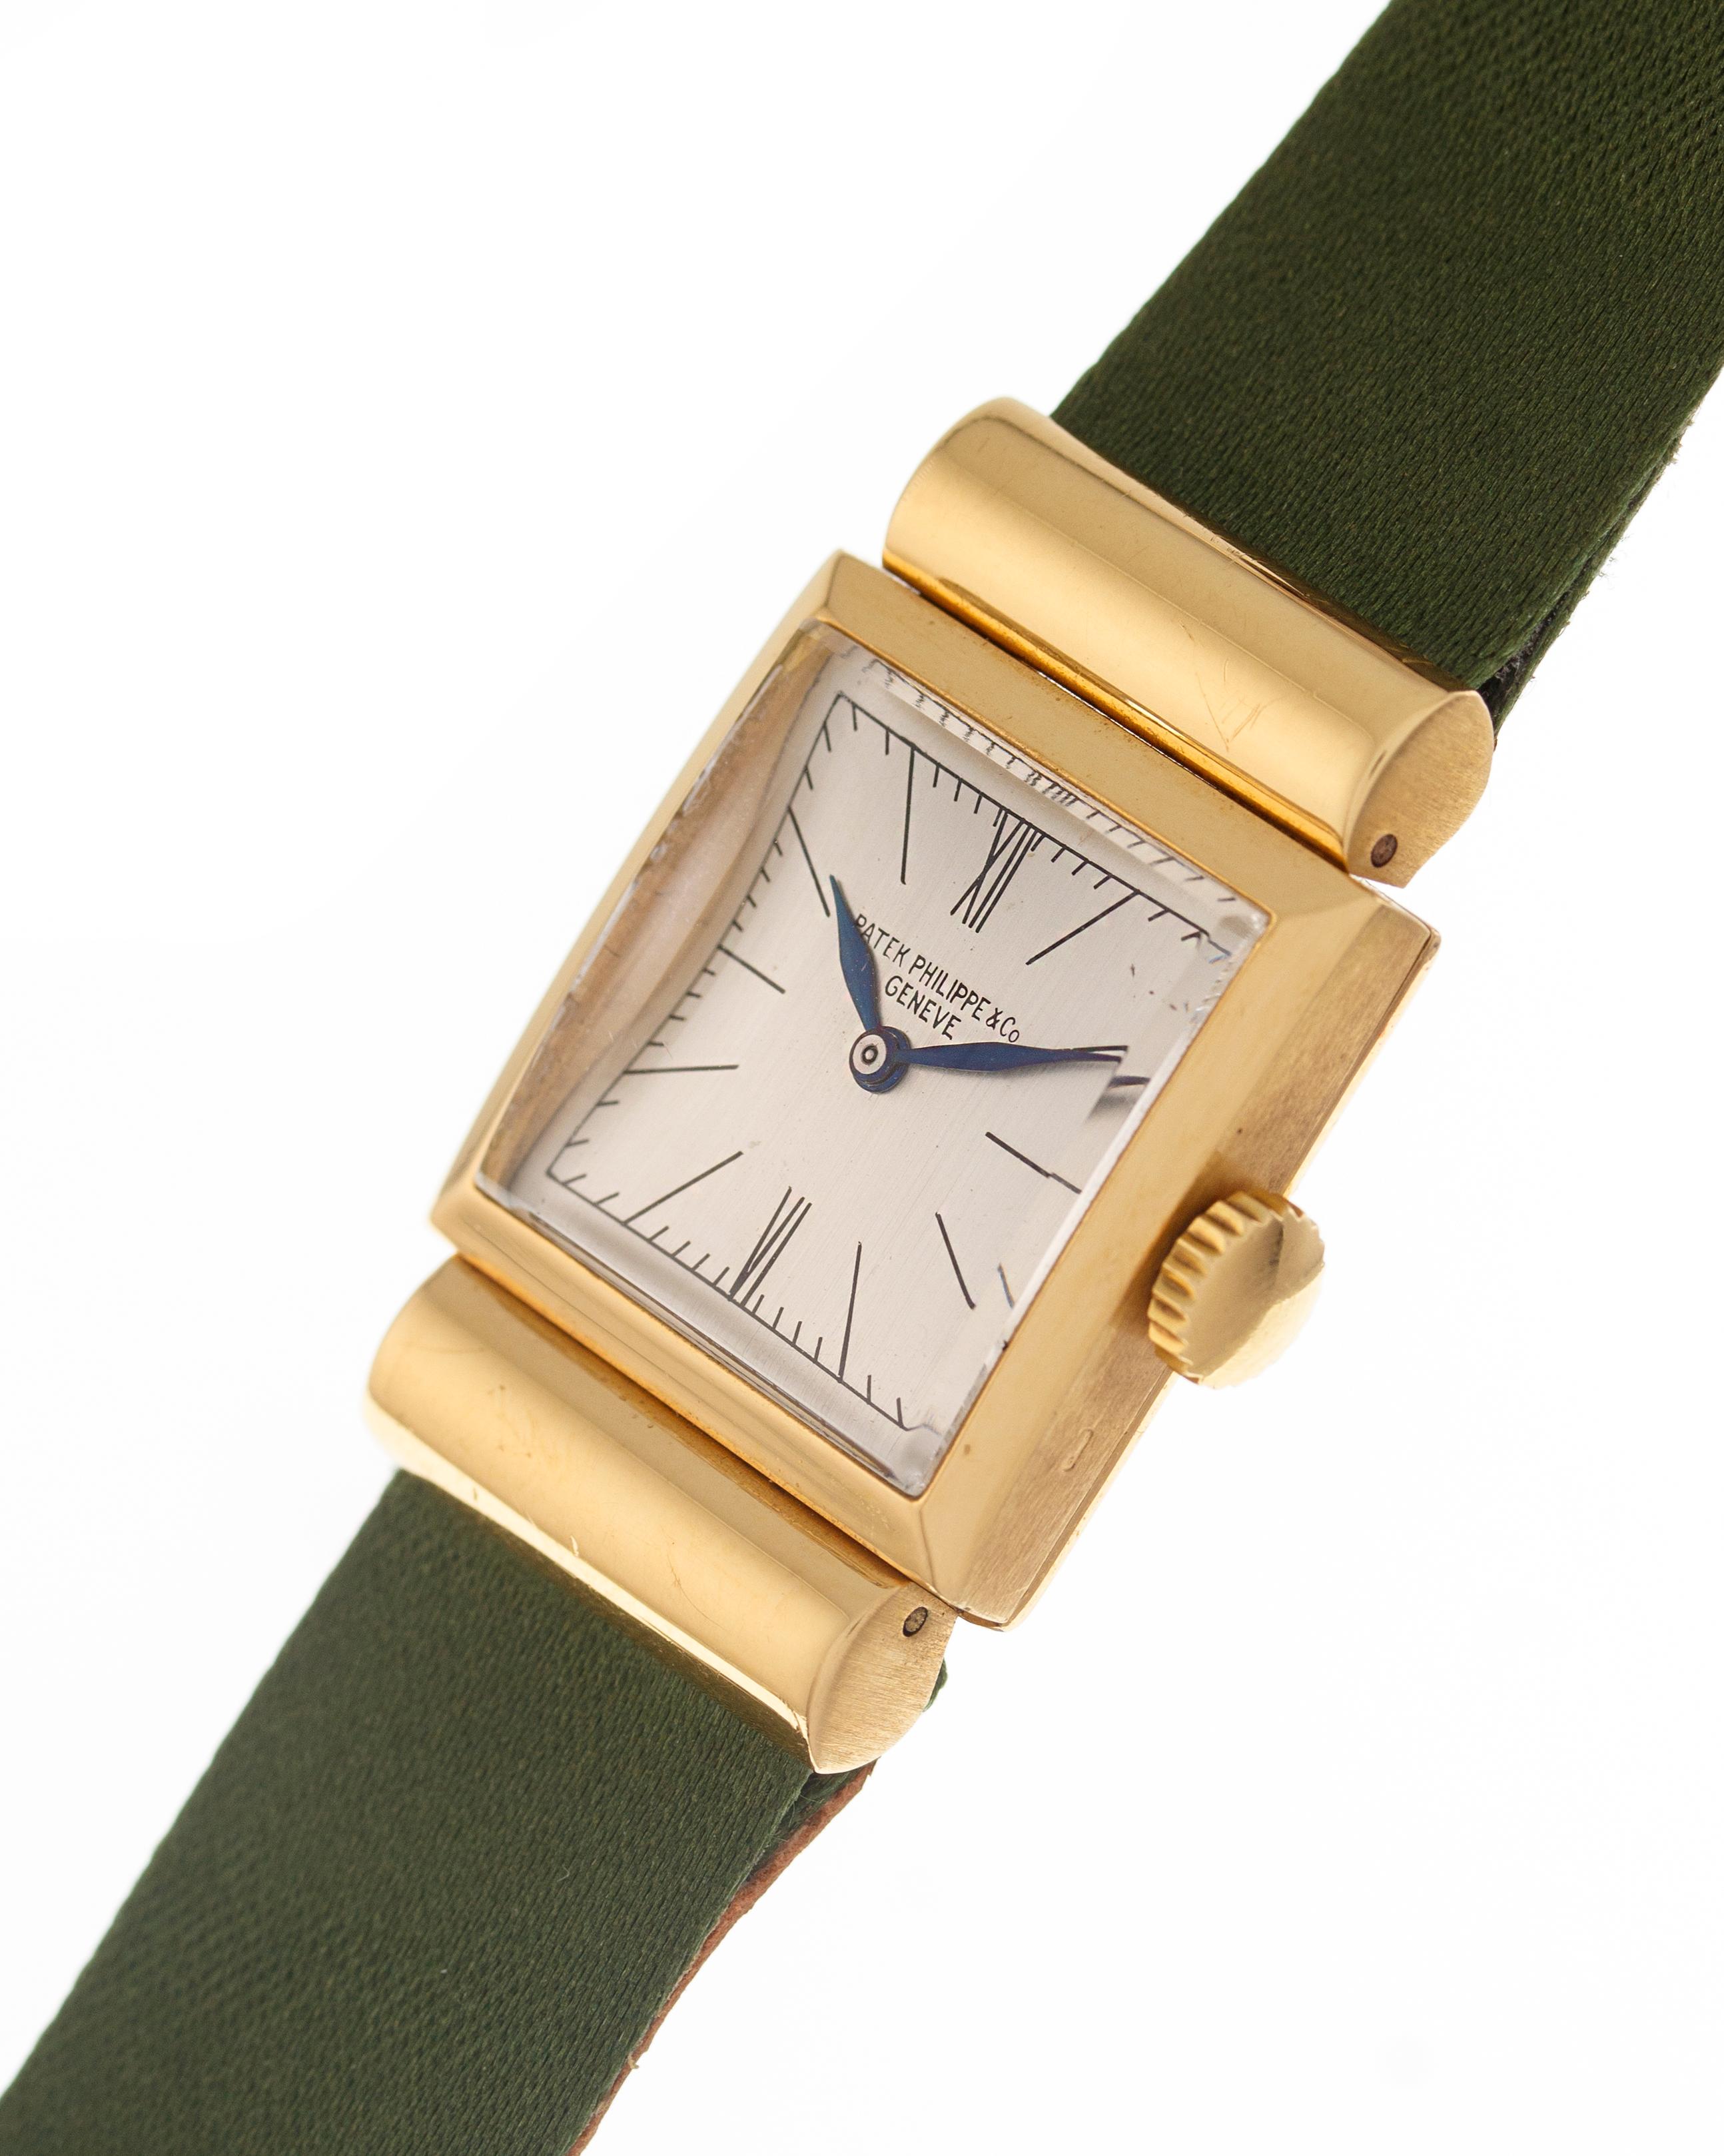 Case: 33 x 21 mm rectangular case in 18 kt in yellow gold with hooded lugs, snap on back

Dial: original argenté with baton indexes and 6 and 12 in Roman, burnished steel hands

Movement: manual winding

Year: 1940 circa

